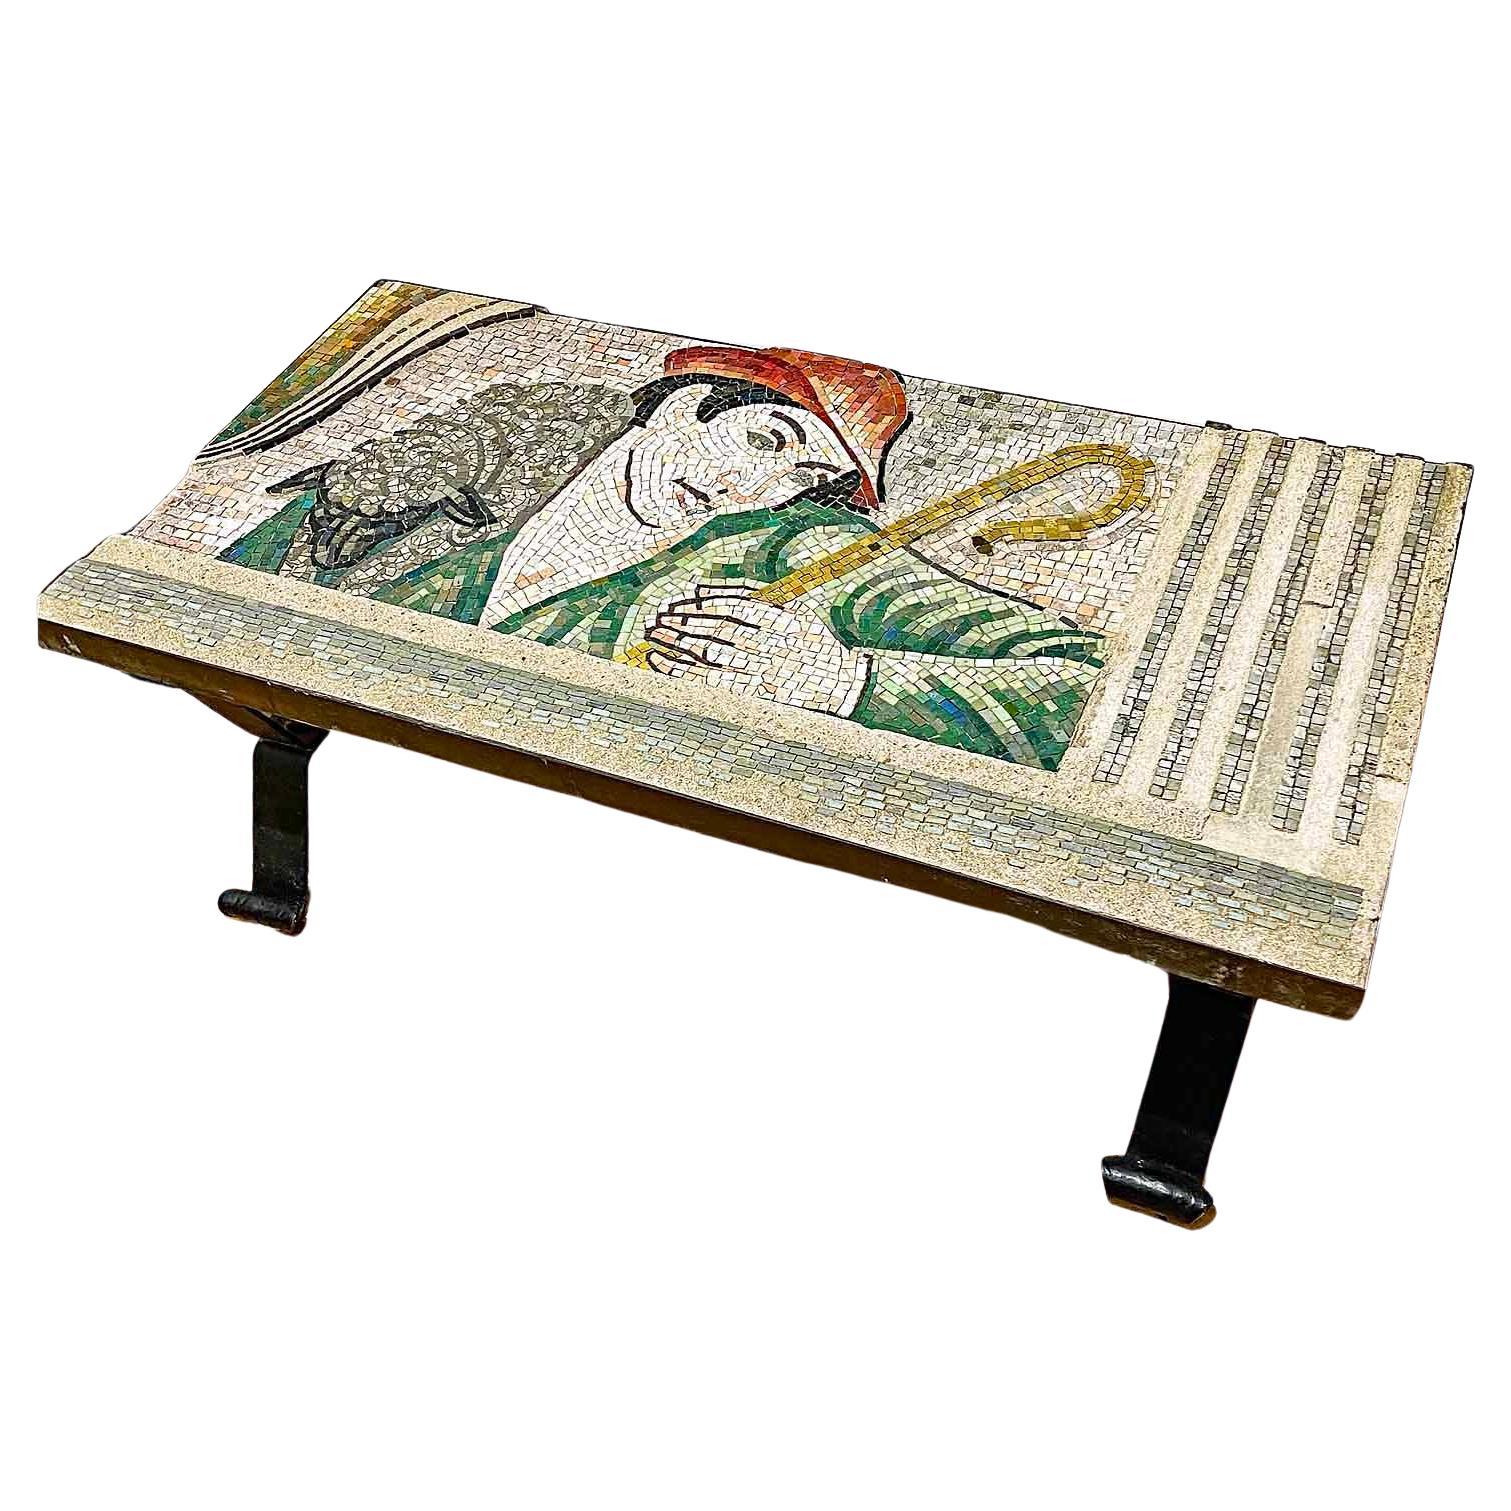 "Shepherd and Sheep", Stunning Art Deco Mosaic Table in Green, Red and Gold For Sale